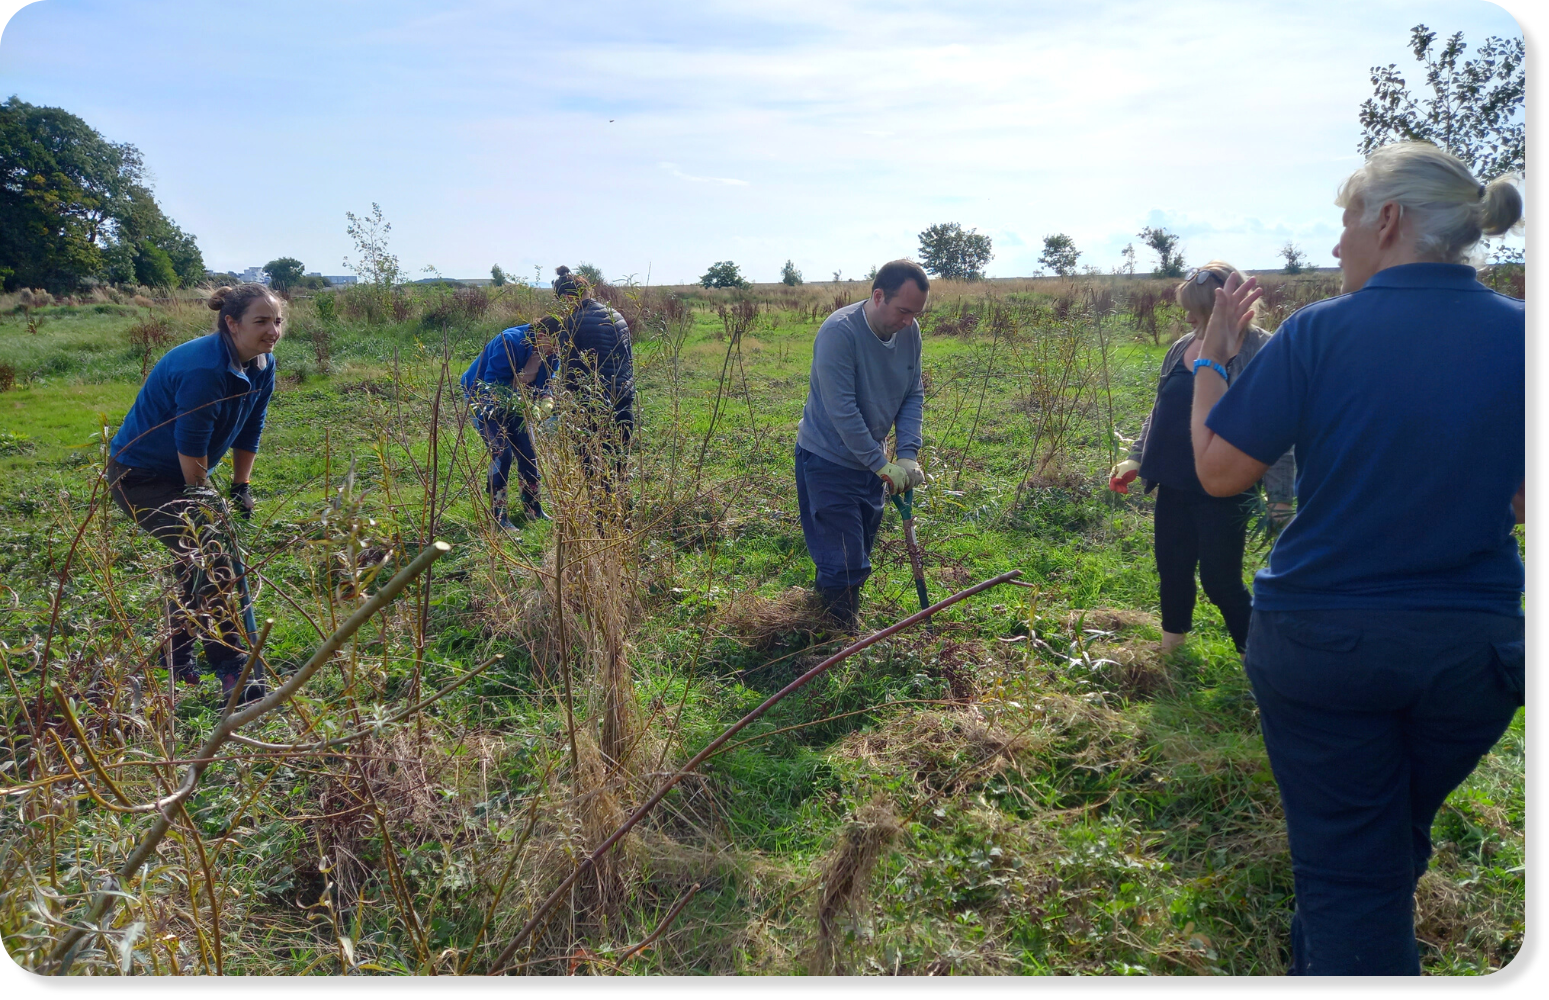 Group of people working alongside each other, taking part in conservation volunteering in a field on a sunny day